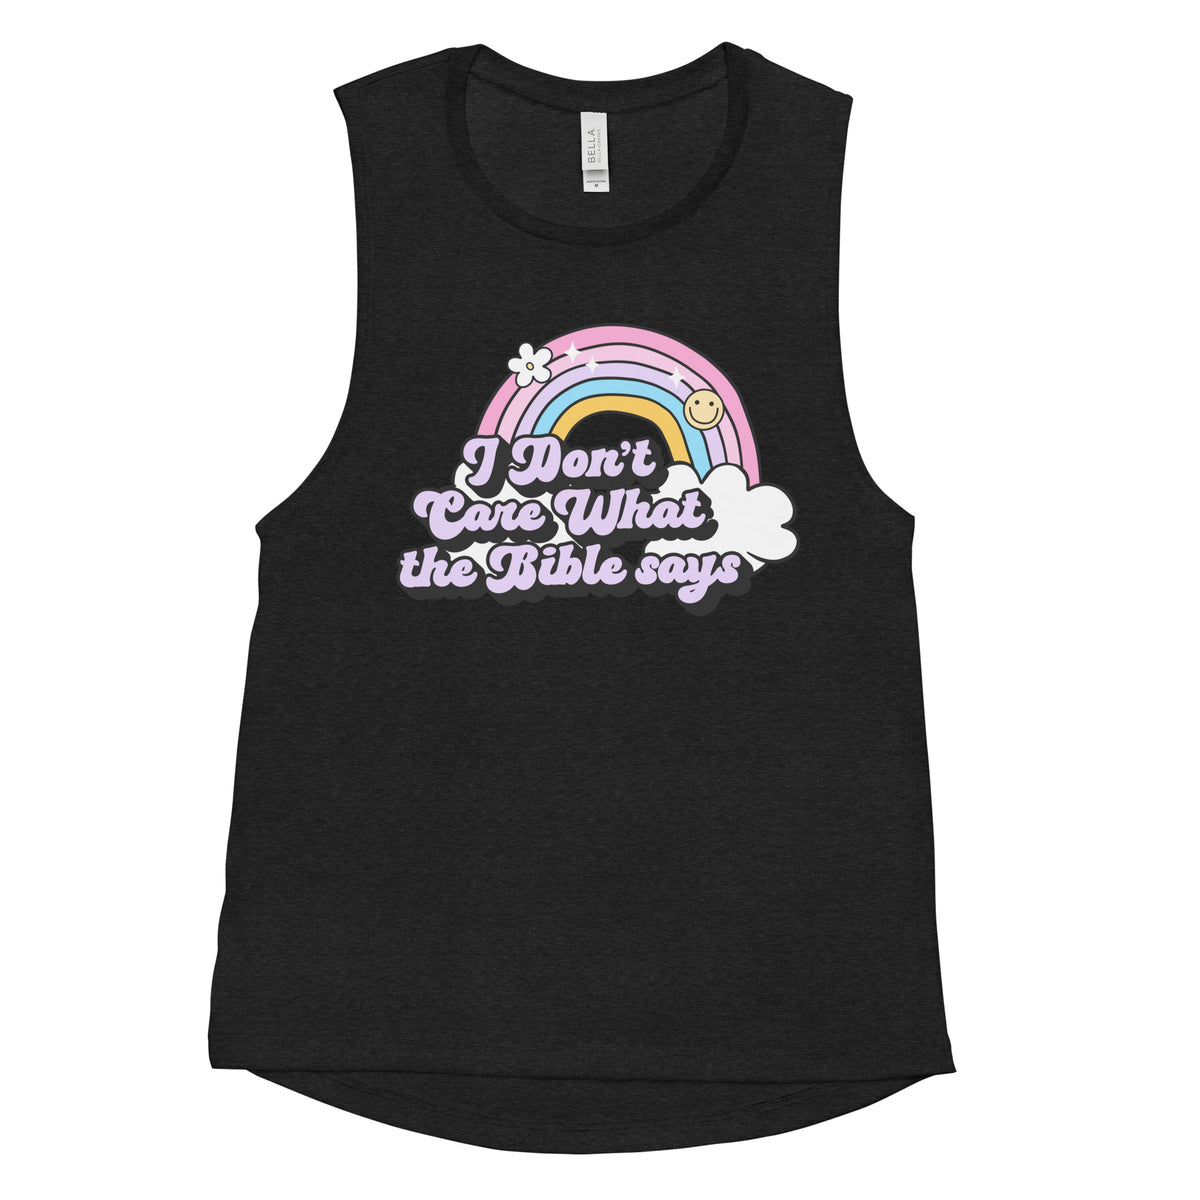 I Don't Care What the Bible Says Women's Muscle Tank